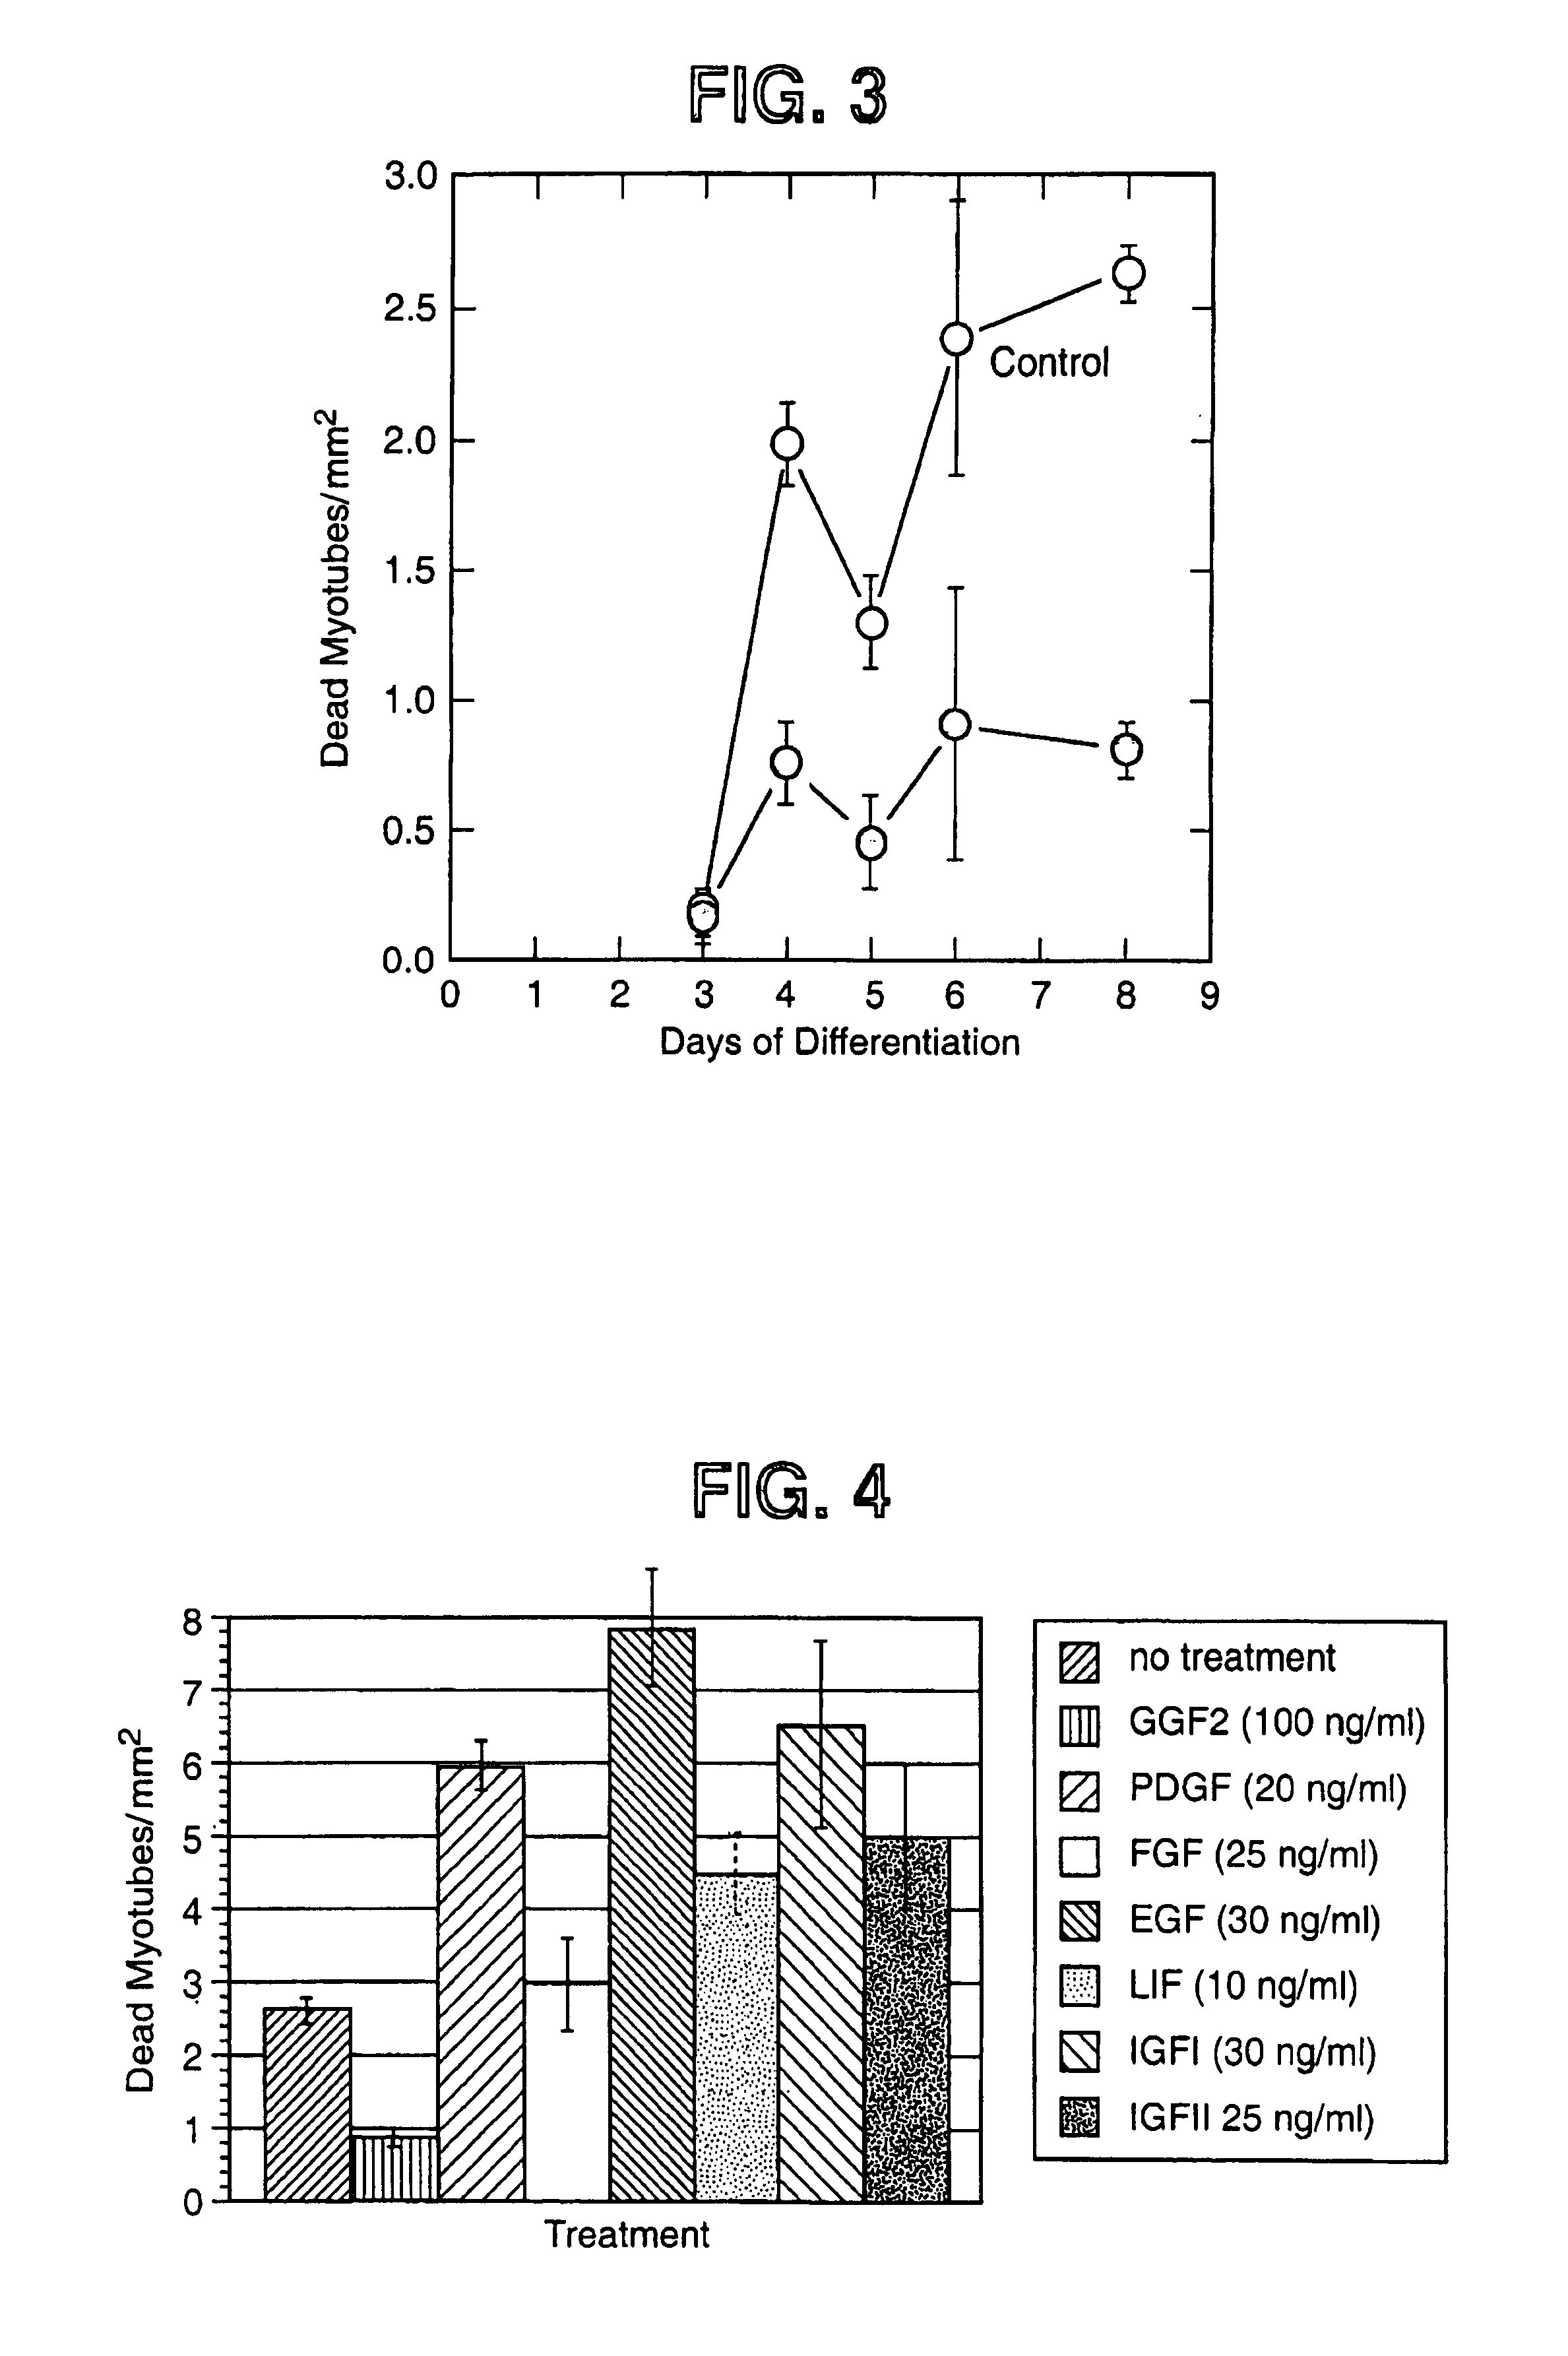 Methods of increasing myotube formation or survival or muscle cell mitogenesis differentiation or survival using neuregulin GGF III